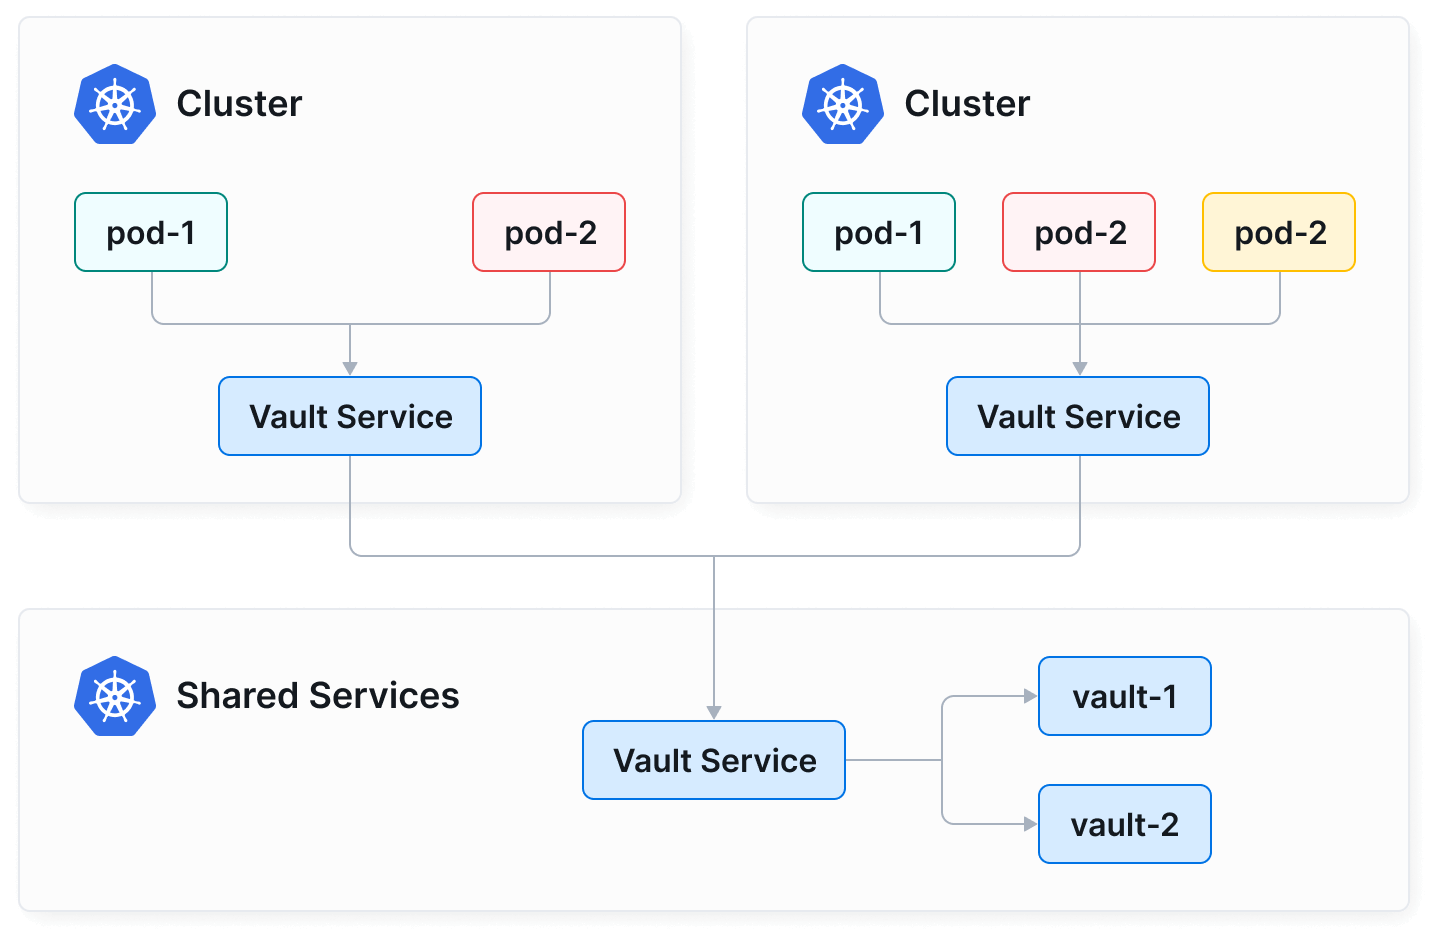 shared services in multi-cluster illustration